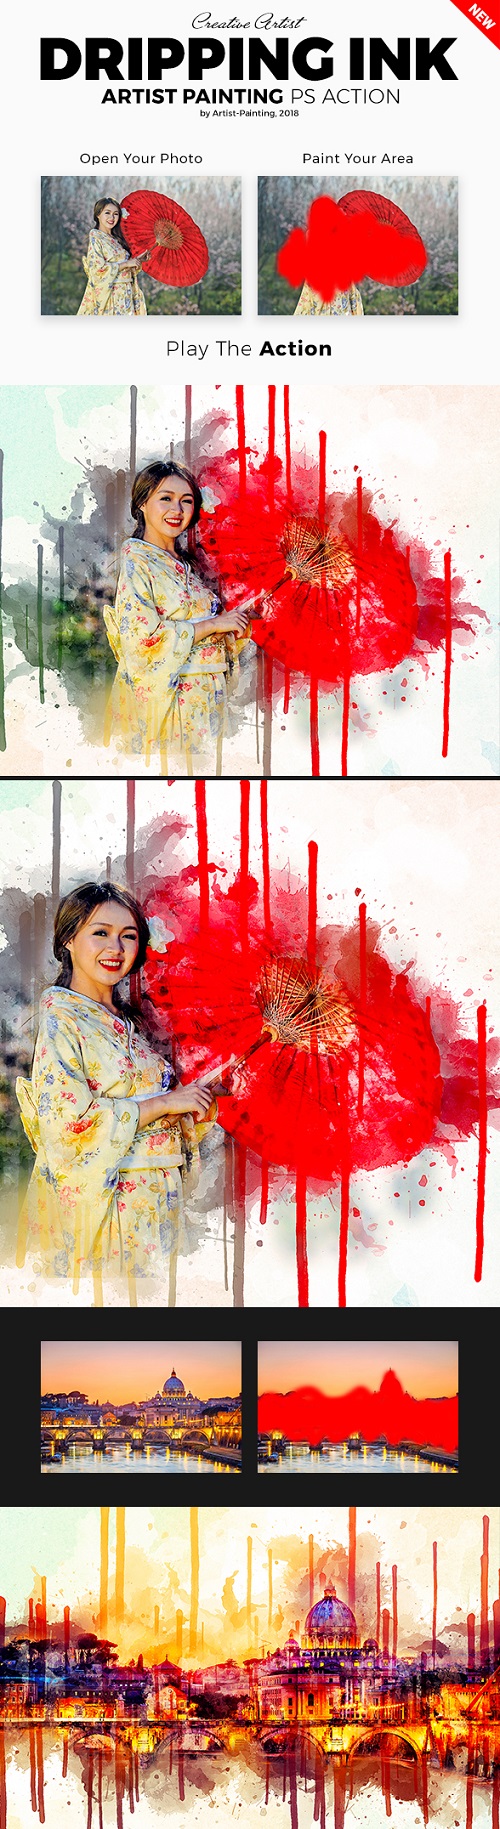 Dripping Ink Artist Painting Photoshop Action 21399581